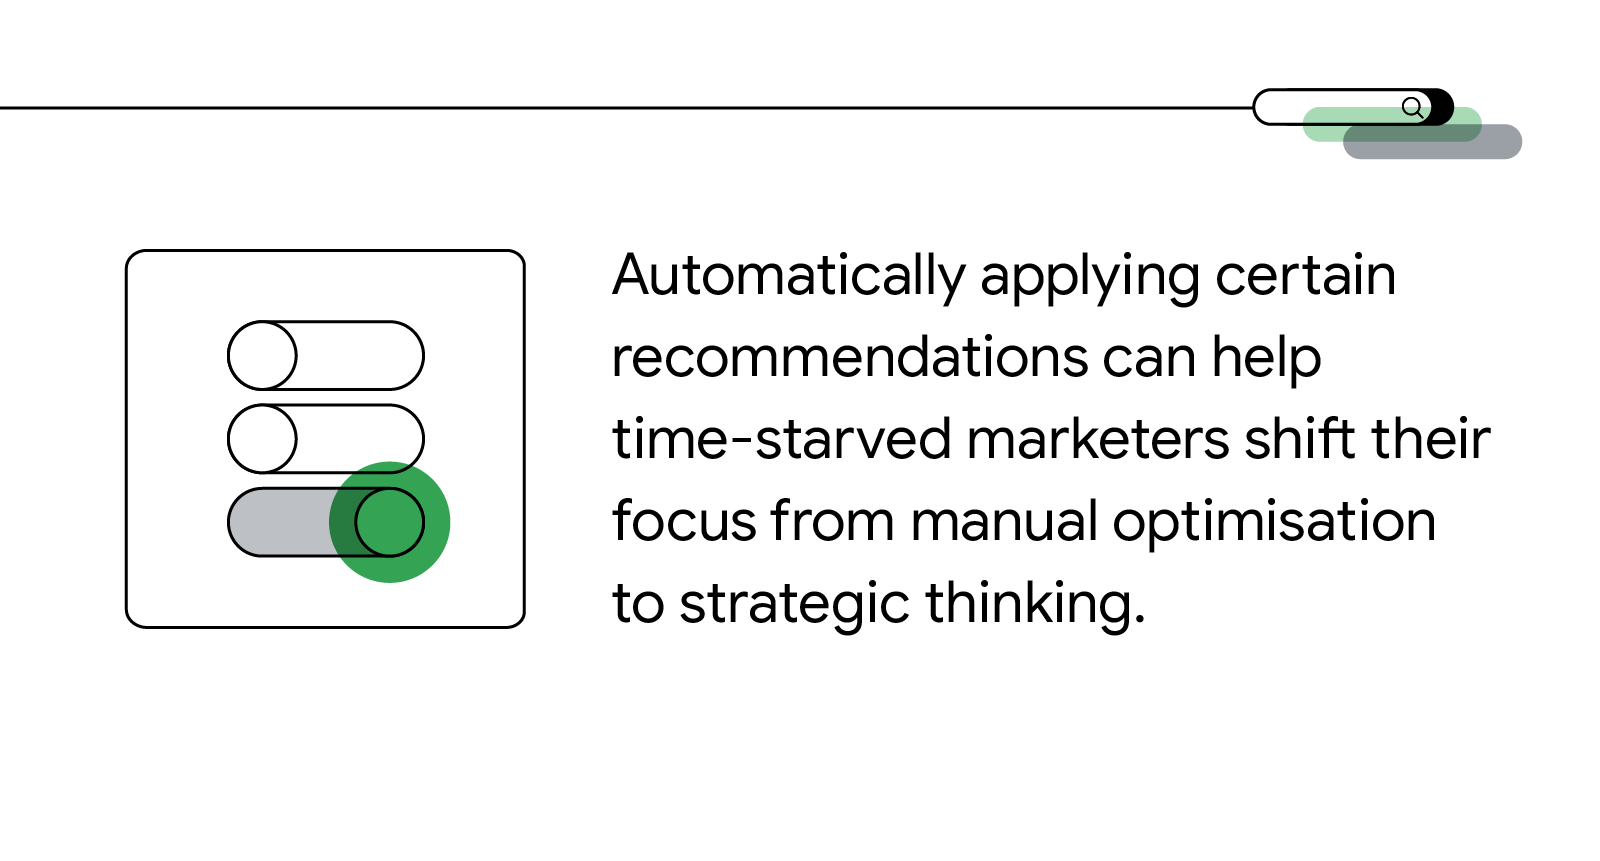 A simple illustration showing three toggle buttons, with one toggle shown as ‘on’ with a green overlaid circle. Text in the image says: “Automatically applying certain recommendations can help time-starved marketers shift their focus from manual optimisat